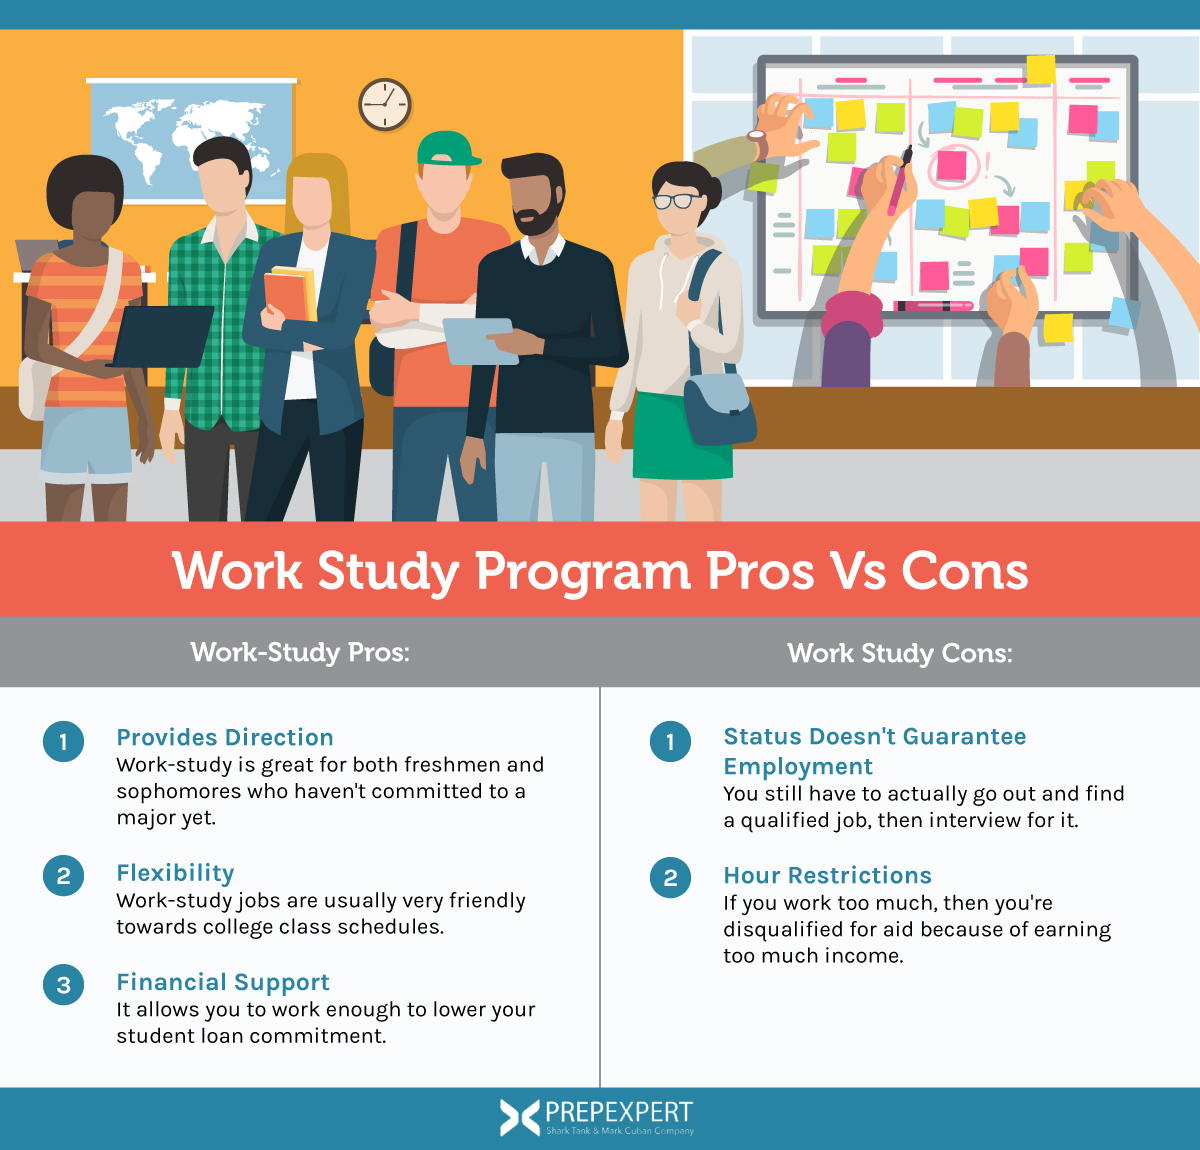 why work study programs could be a helpful way to help finance an education